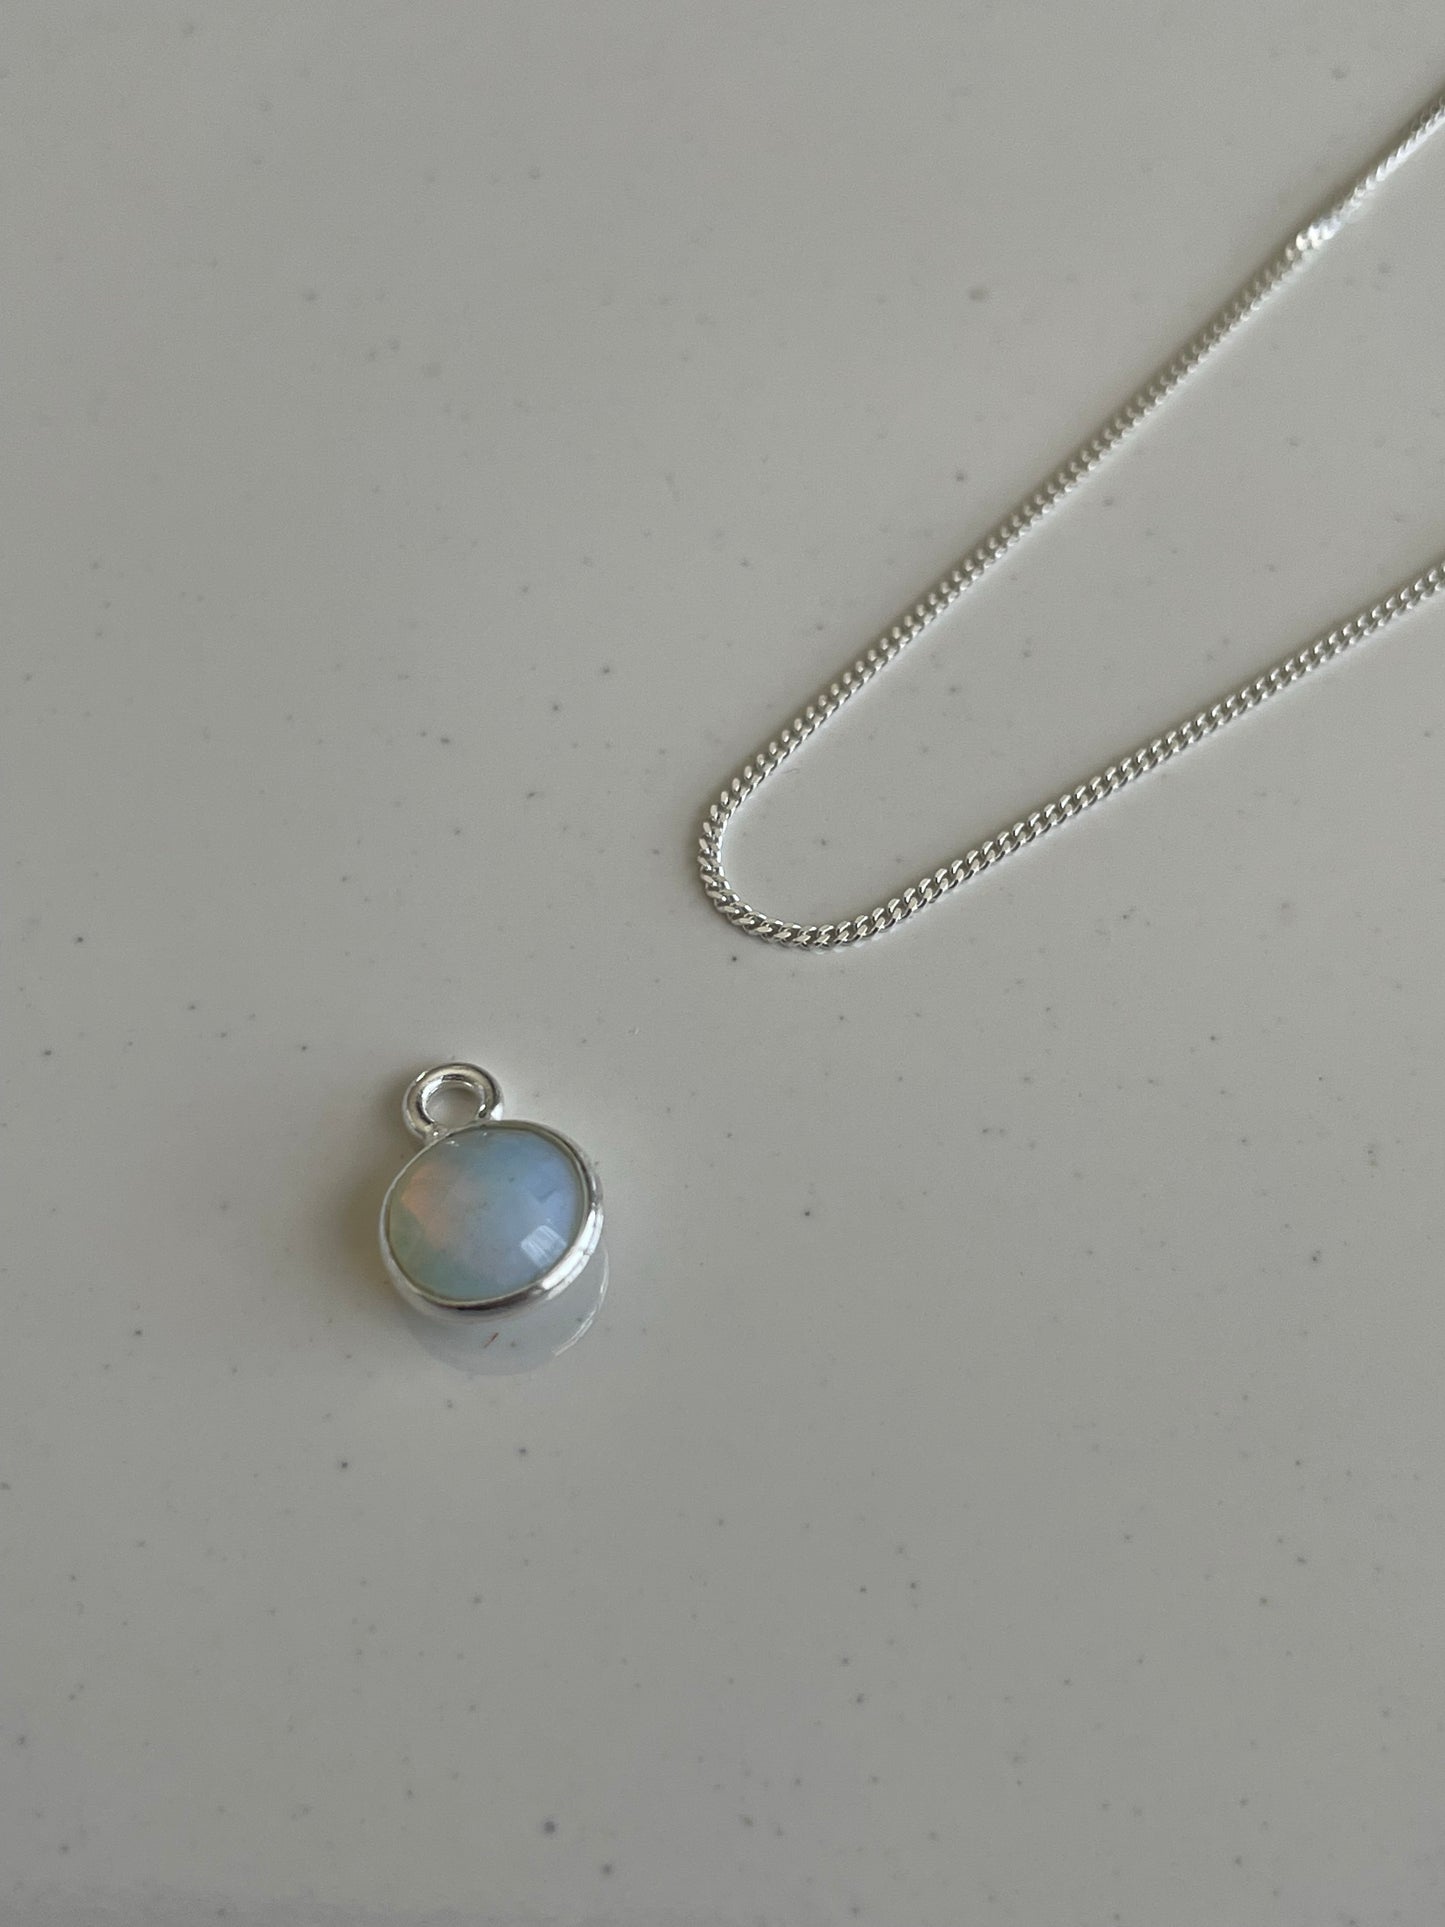 October’s Opalite In Silver